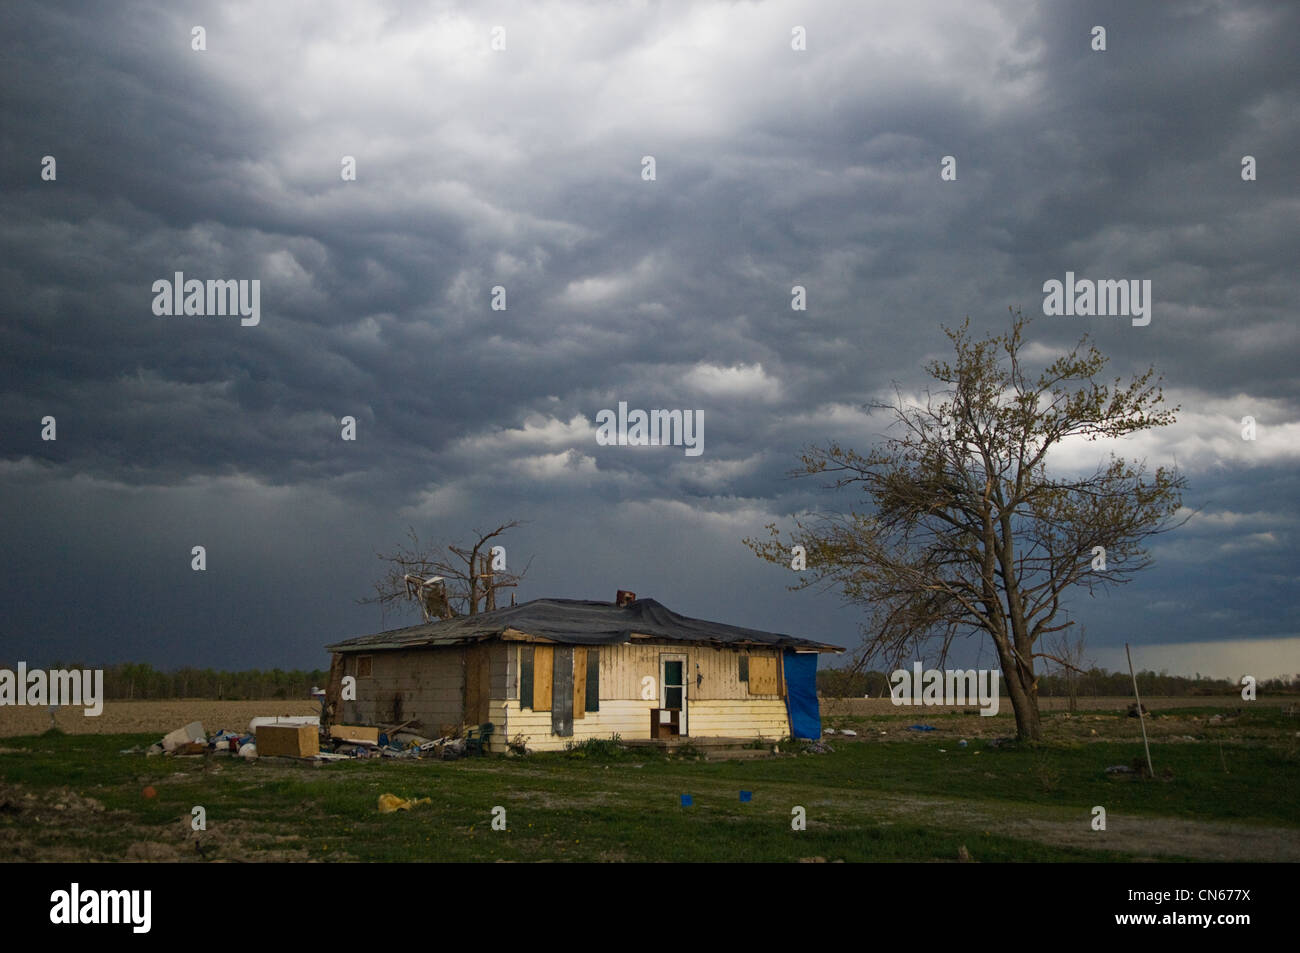 Storm Clouds Over Home Damaged By March 2 Tornado in Holton, Indiana Stock Photo